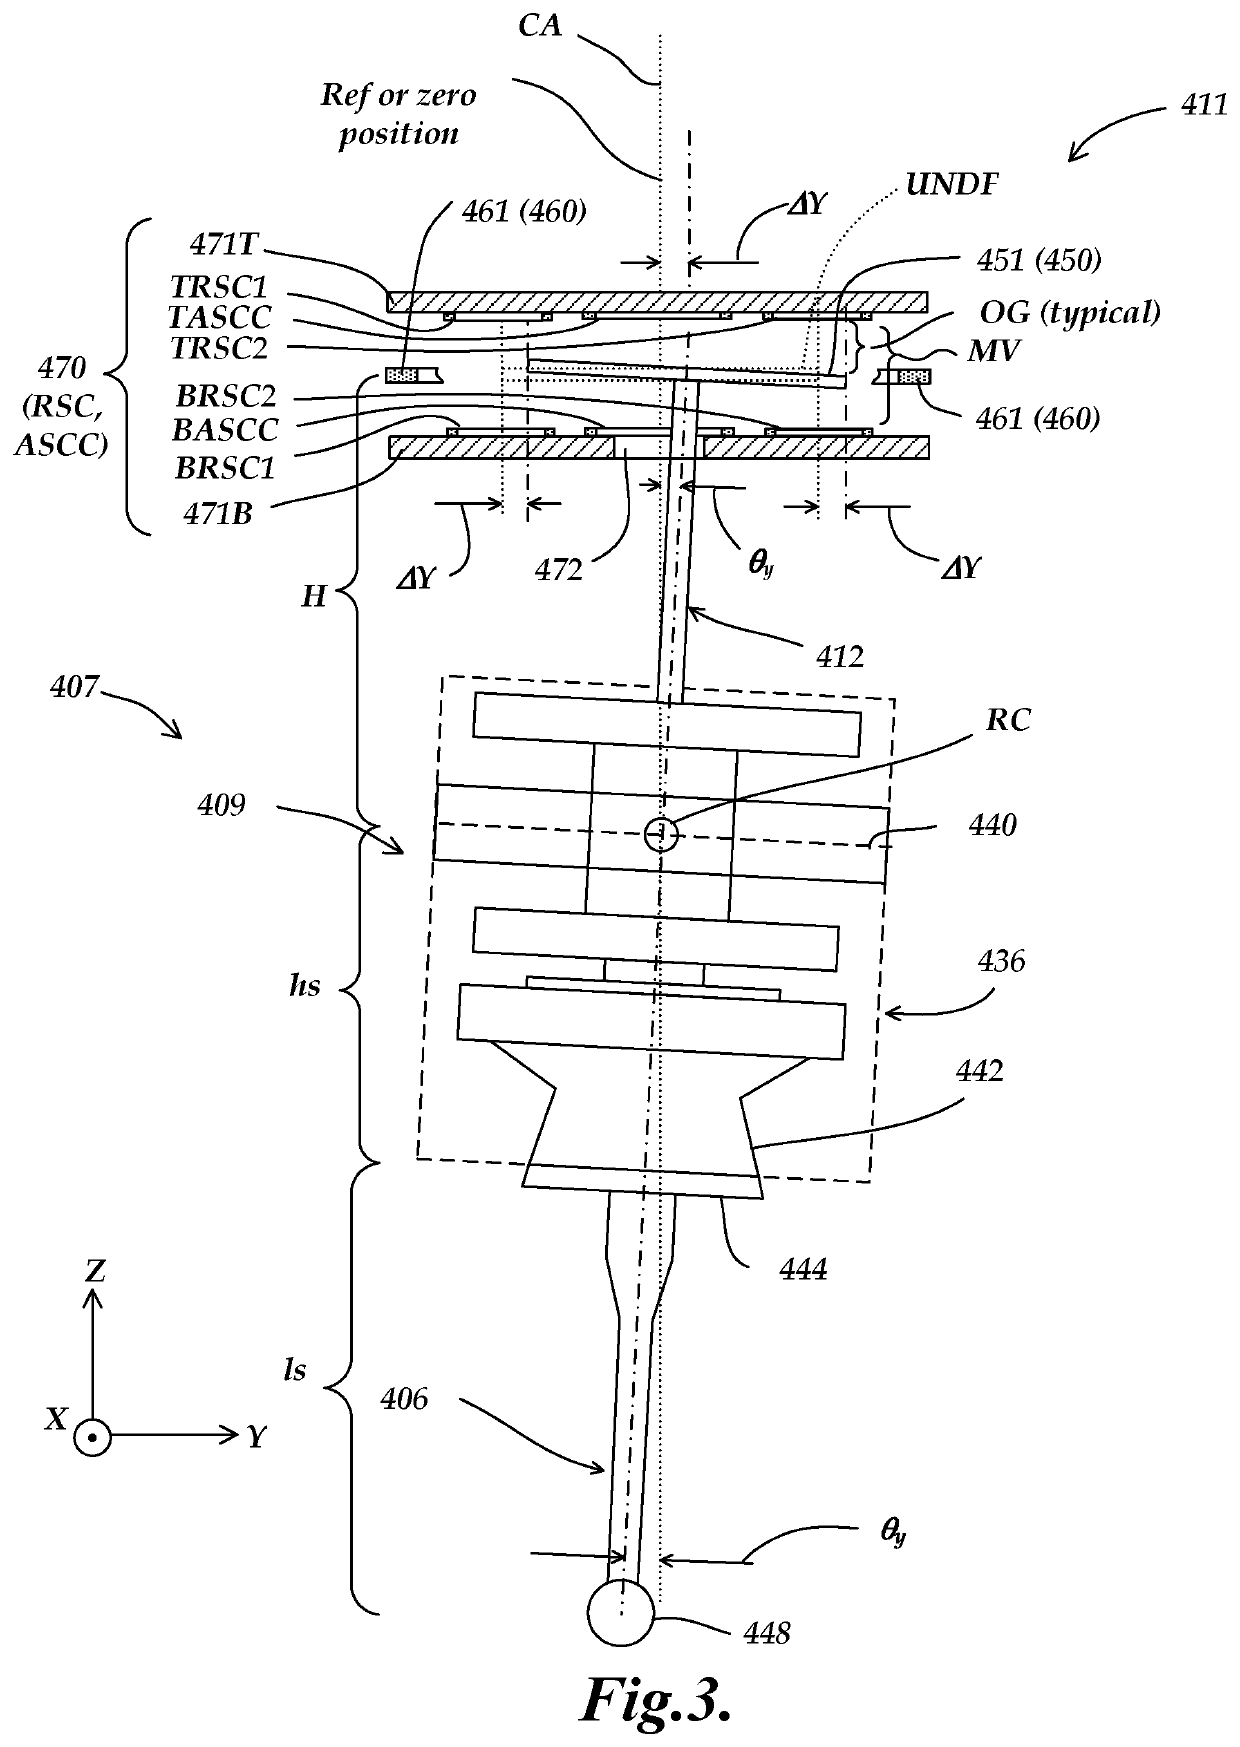 Inductive position detection configuration for indicating a measurement device stylus position